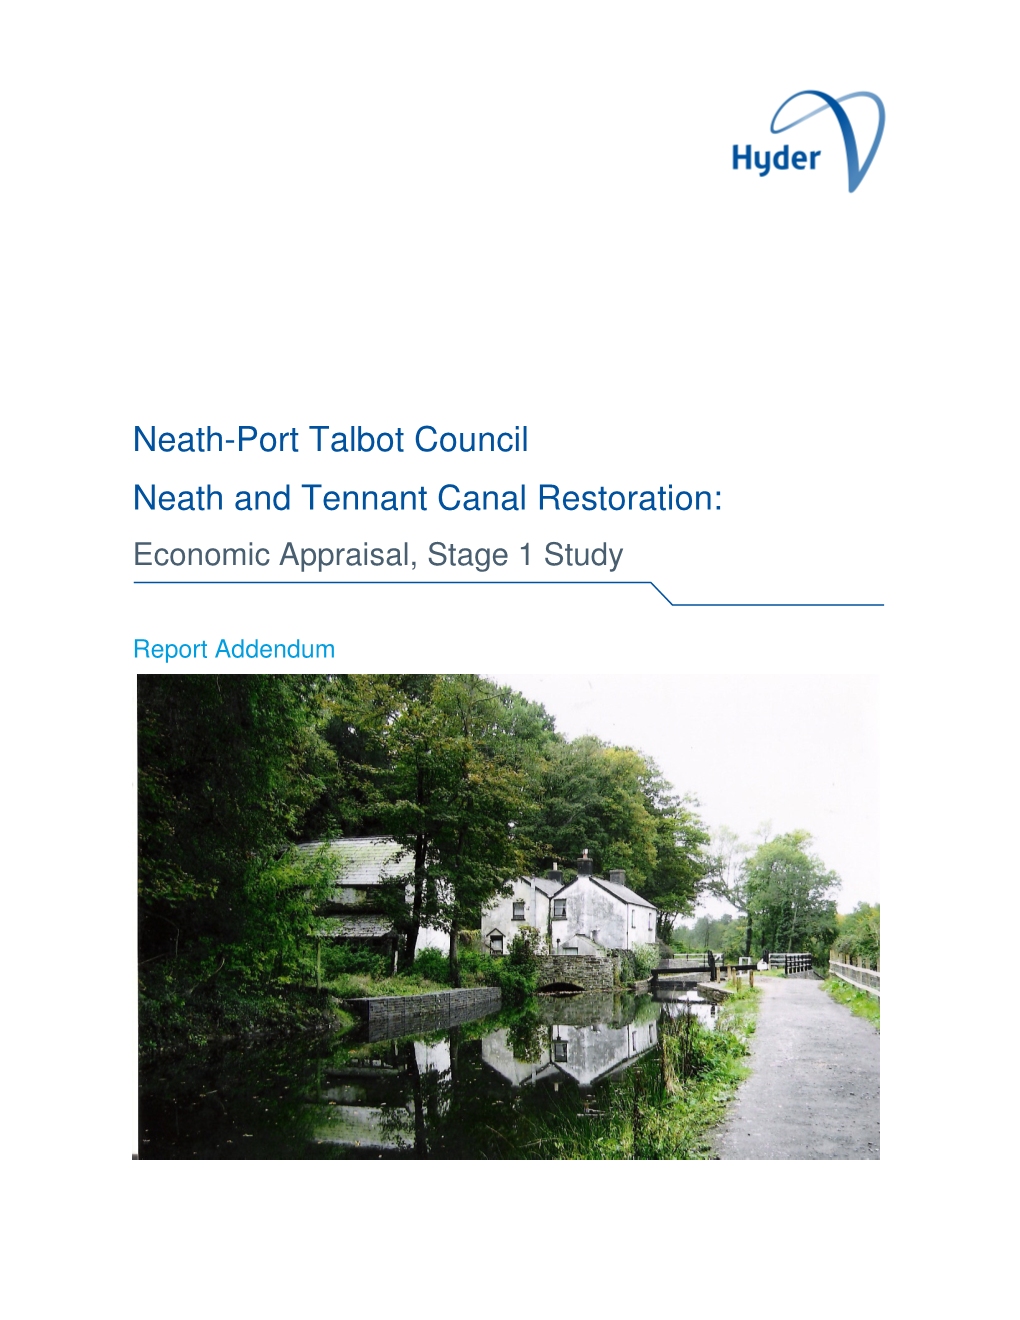 Neath-Port Talbot Council Neath and Tennant Canal Restoration: Economic Appraisal, Stage 1 Study